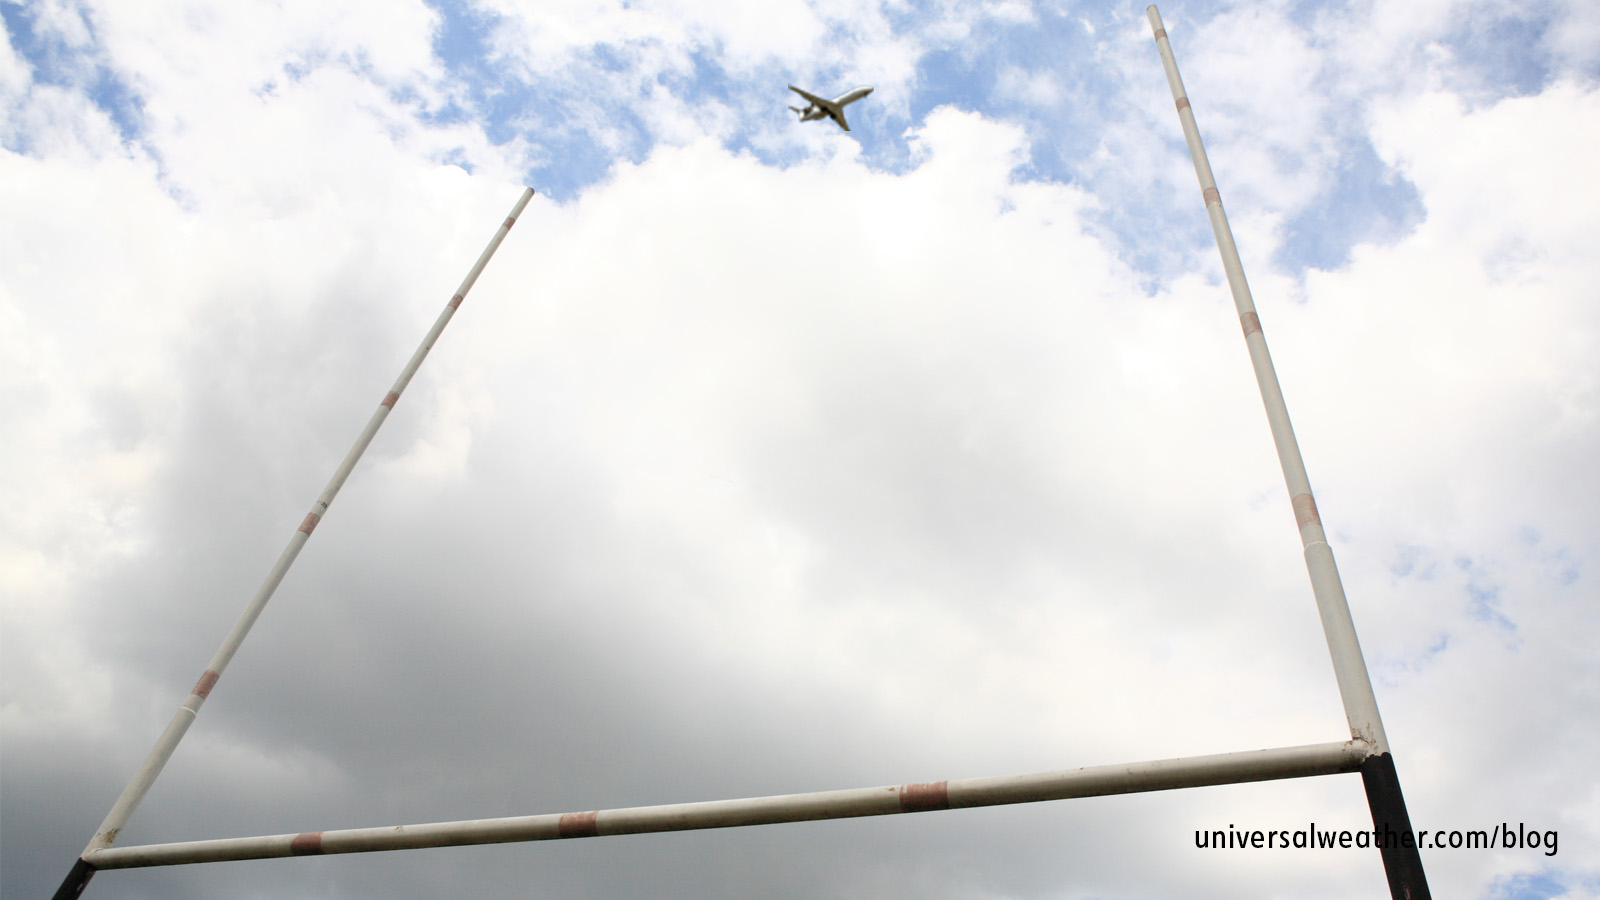 Business Aircraft Ops Planning: Rugby World Cup 2015 (UK)